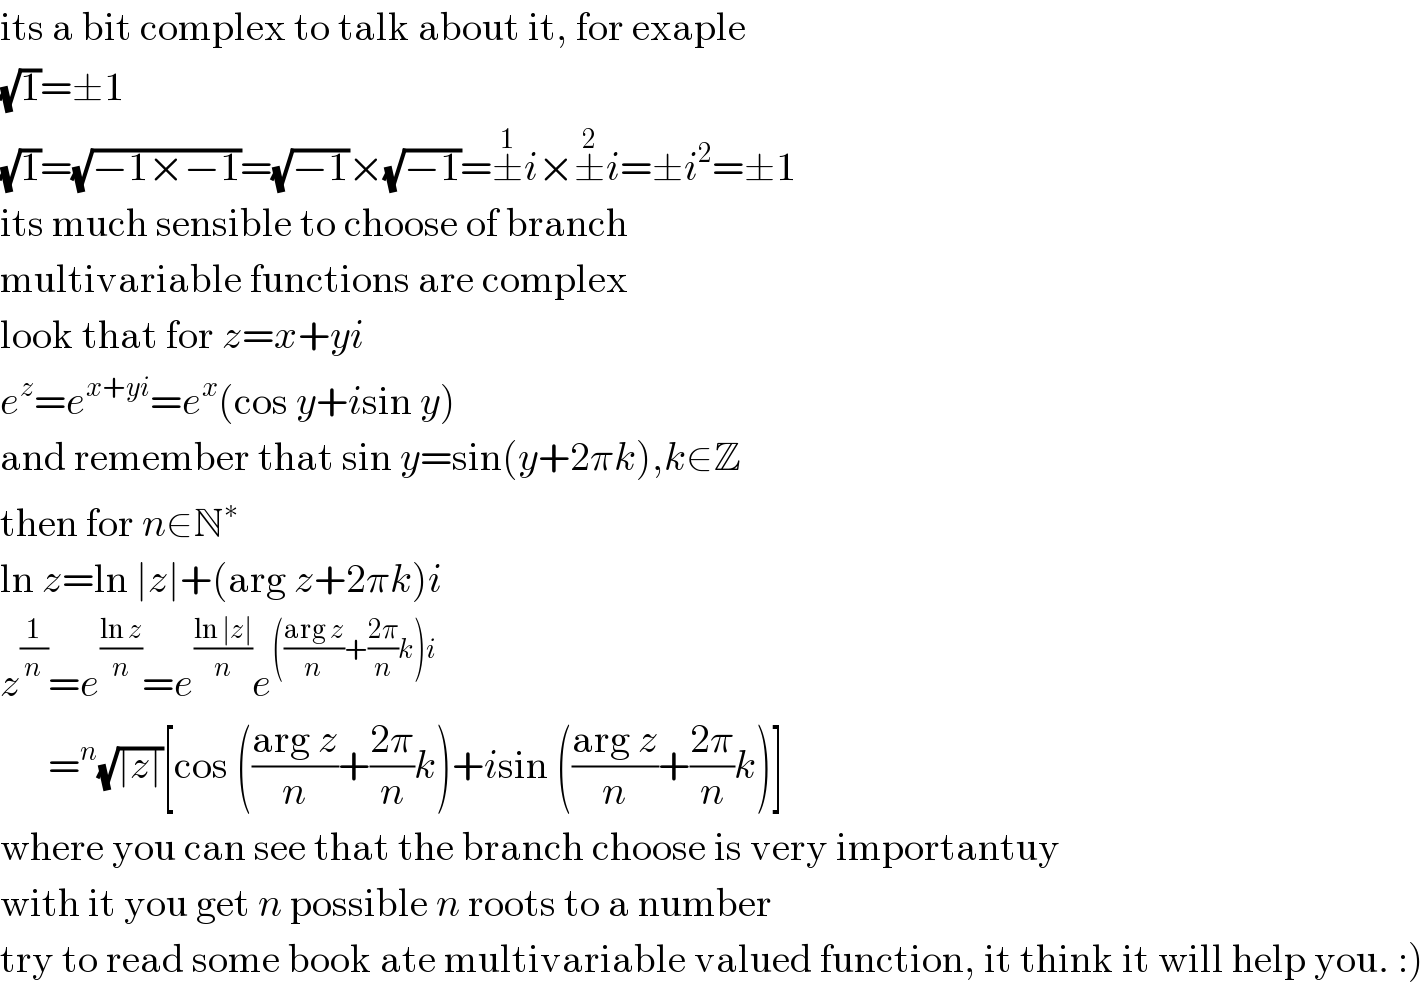 its a bit complex to talk about it, for exaple  (√1)=±1  (√1)=(√(−1×−1))=(√(−1))×(√(−1))=±^1 i×±^2 i=±i^2 =±1  its much sensible to choose of branch  multivariable functions are complex  look that for z=x+yi  e^z =e^(x+yi) =e^x (cos y+isin y)  and remember that sin y=sin(y+2πk),k∈Z  then for n∈N^∗   ln z=ln ∣z∣+(arg z+2πk)i  z^(1/n) =e^((ln z)/n) =e^((ln ∣z∣)/n) e^((((arg z)/n)+((2π)/n)k)i)         =^n (√(∣z∣))[cos (((arg z)/n)+((2π)/n)k)+isin (((arg z)/n)+((2π)/n)k)]  where you can see that the branch choose is very importantuy  with it you get n possible n roots to a number  try to read some book ate multivariable valued function, it think it will help you. :)  